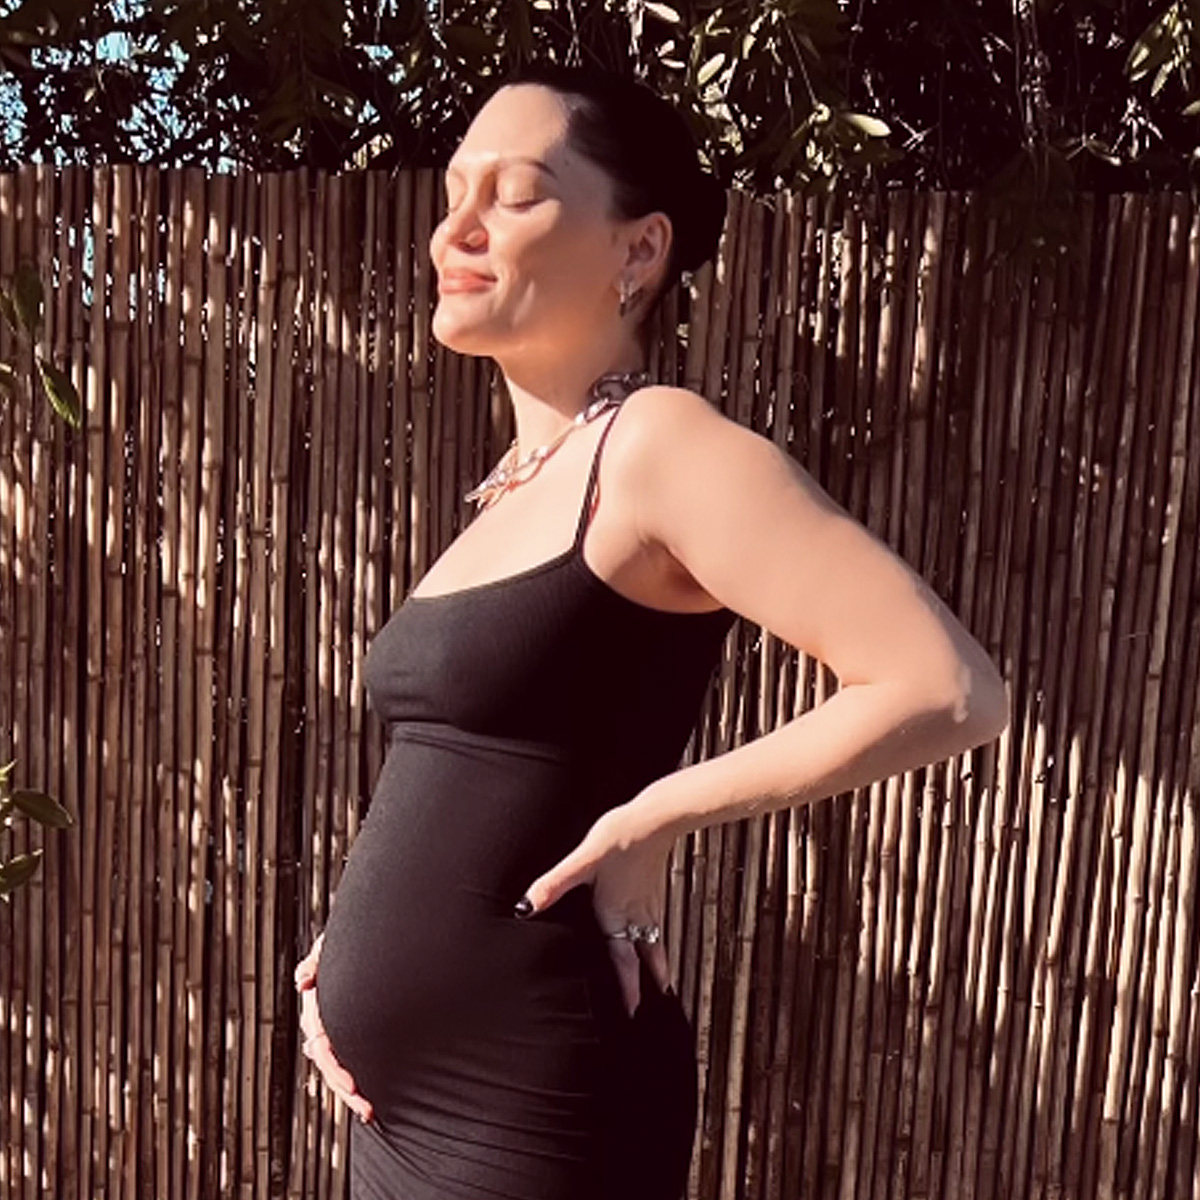 Jessie J praised for showing post-pregnant 'realness' in self-love